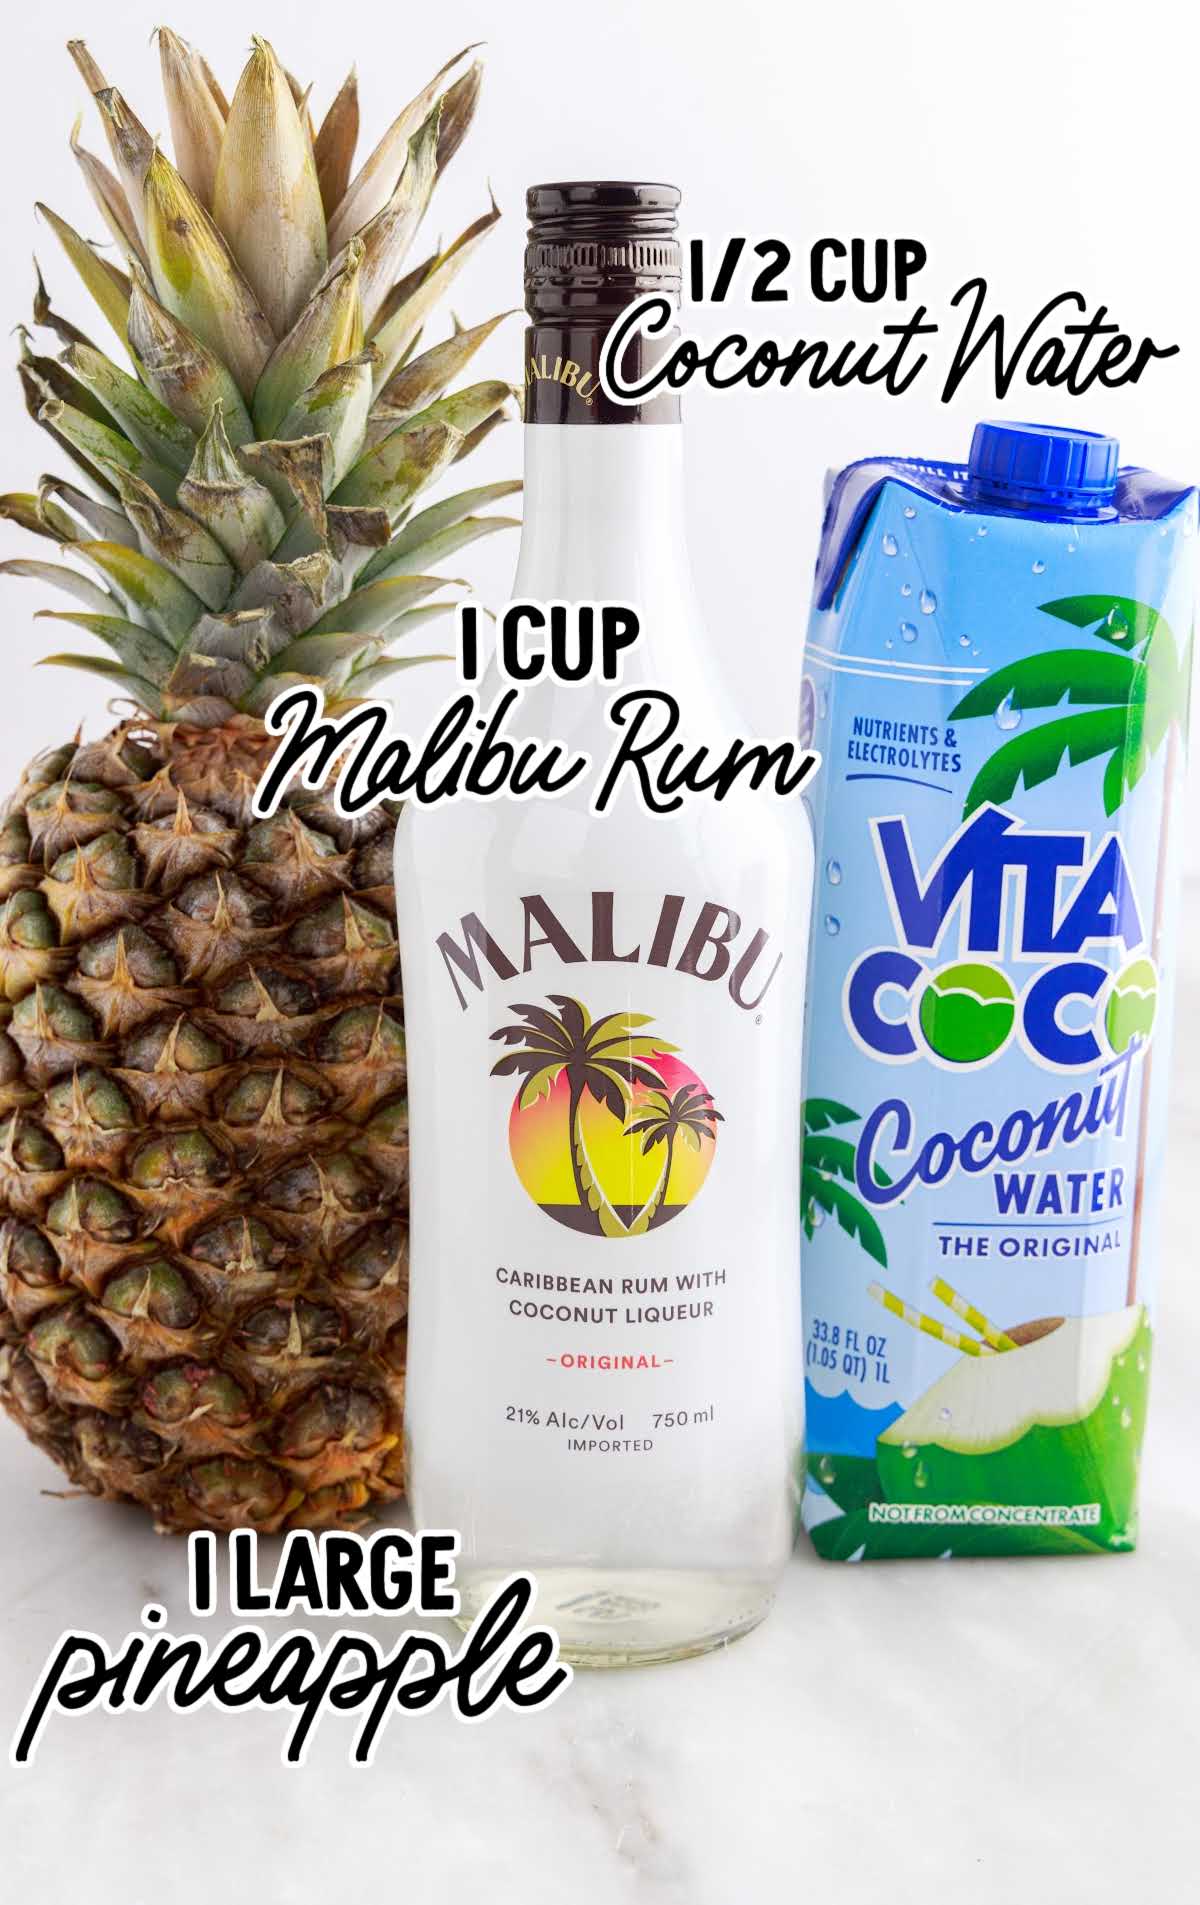 Pineapple Spears in Malibu Rum raw ingredients that are labeled